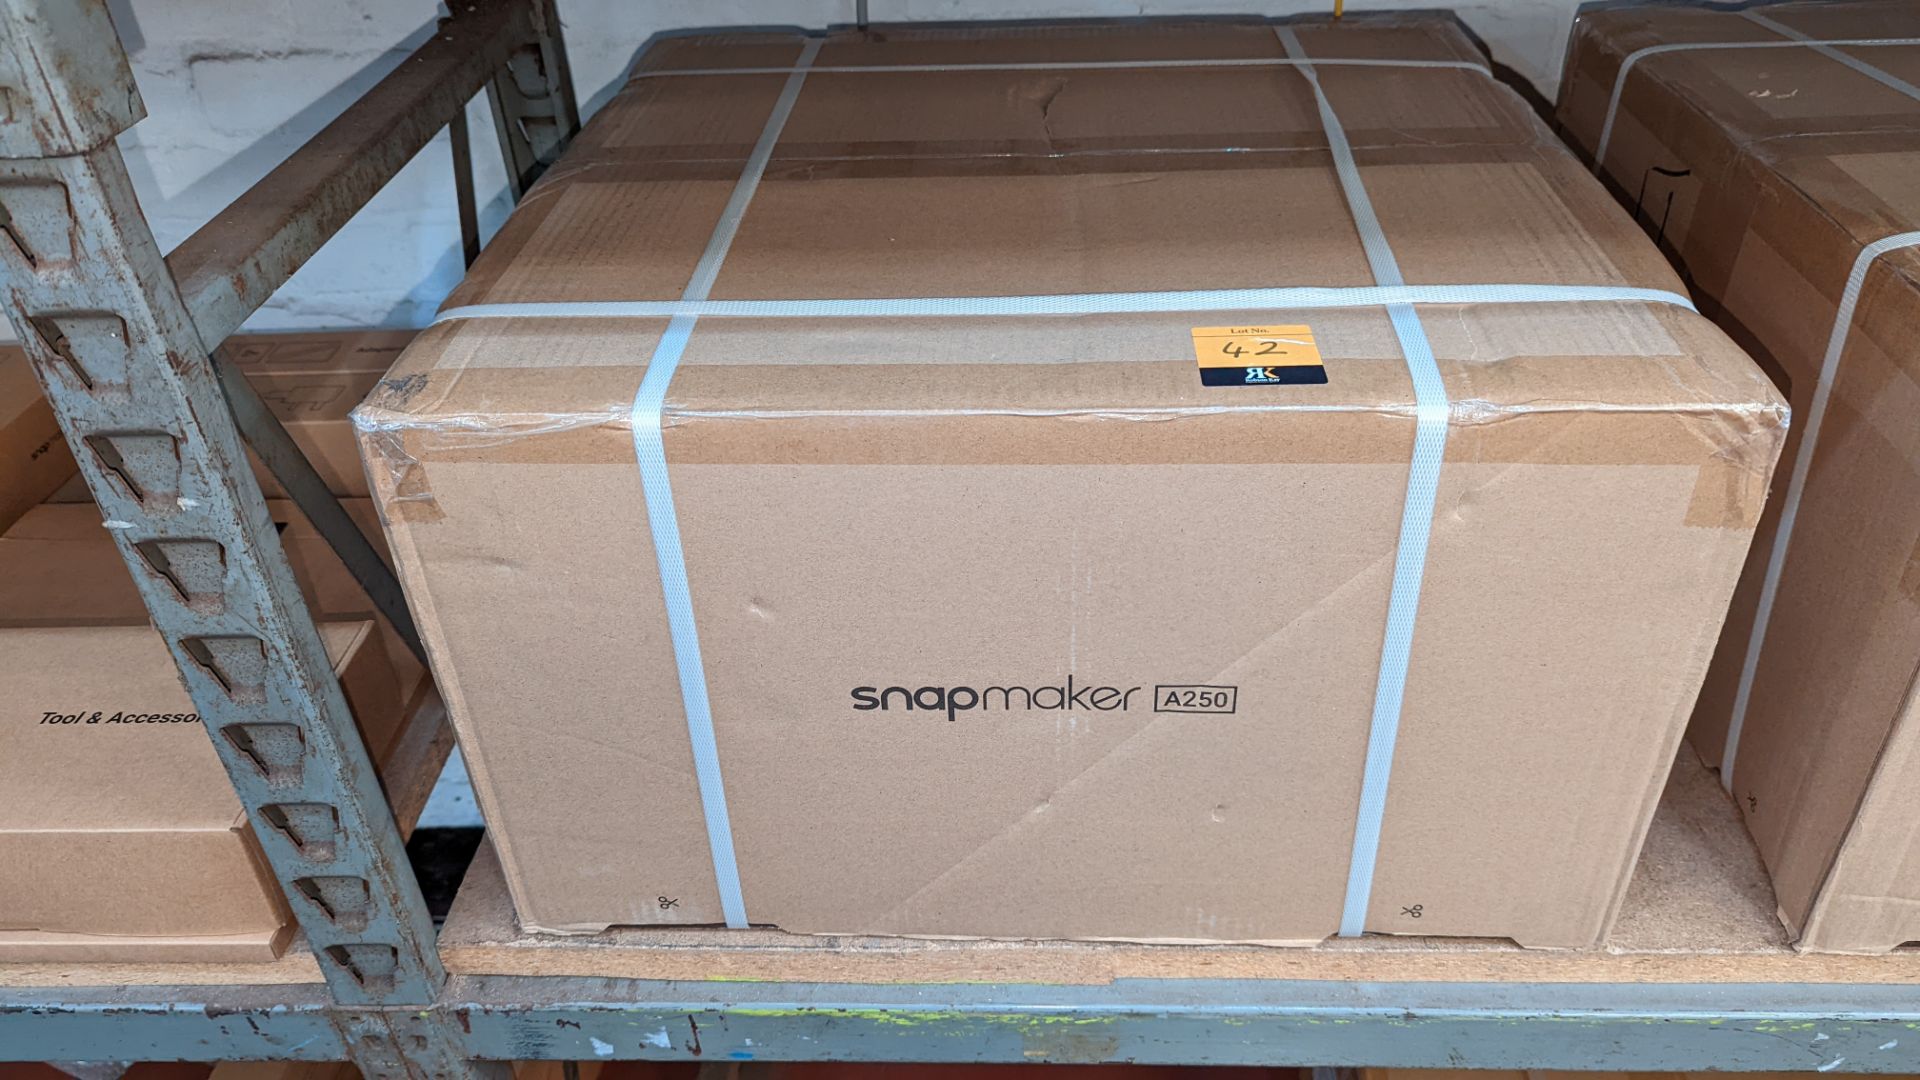 Snapmaker model A250 3D printer - boxed, delivered with original banding, assumed to be new/unused - Image 3 of 4